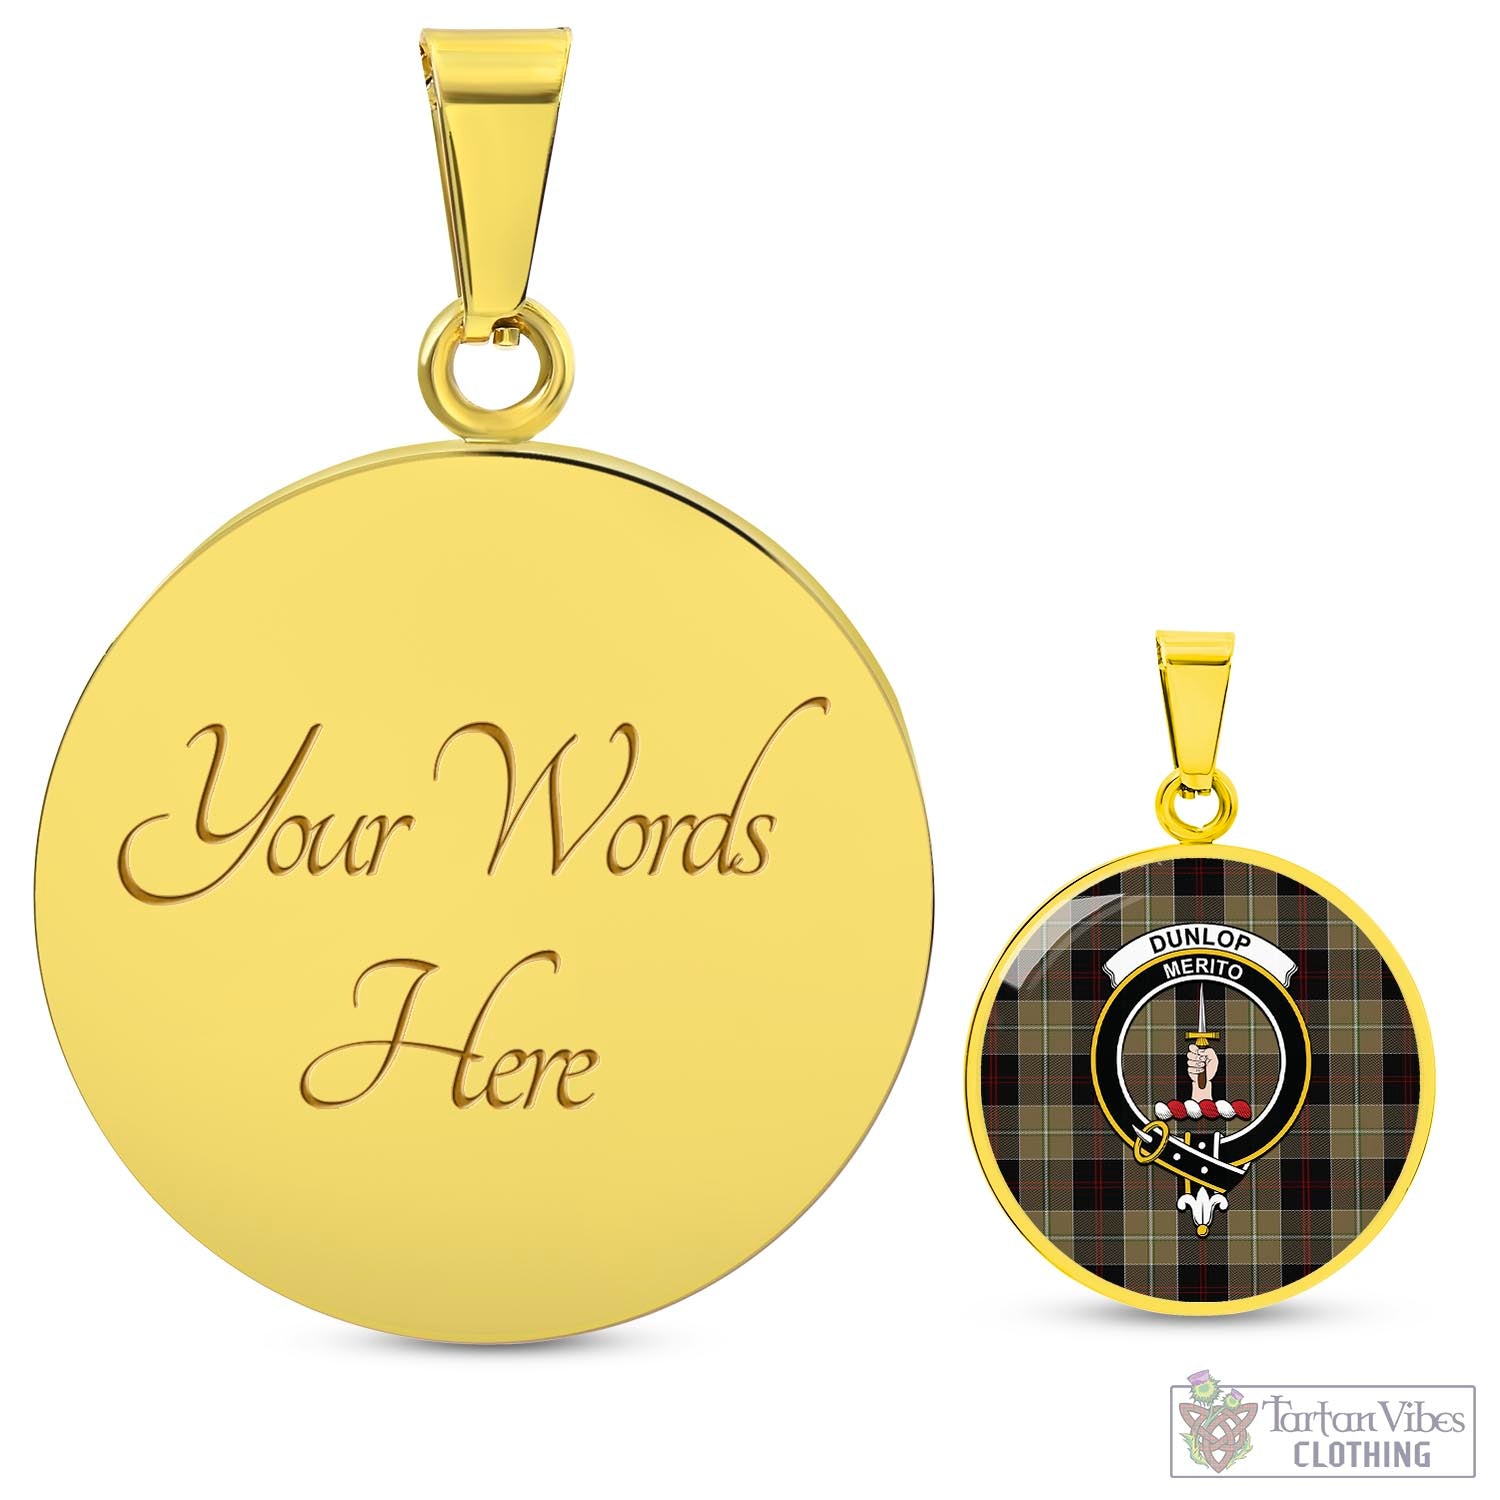 Tartan Vibes Clothing Dunlop Hunting Tartan Circle Necklace with Family Crest